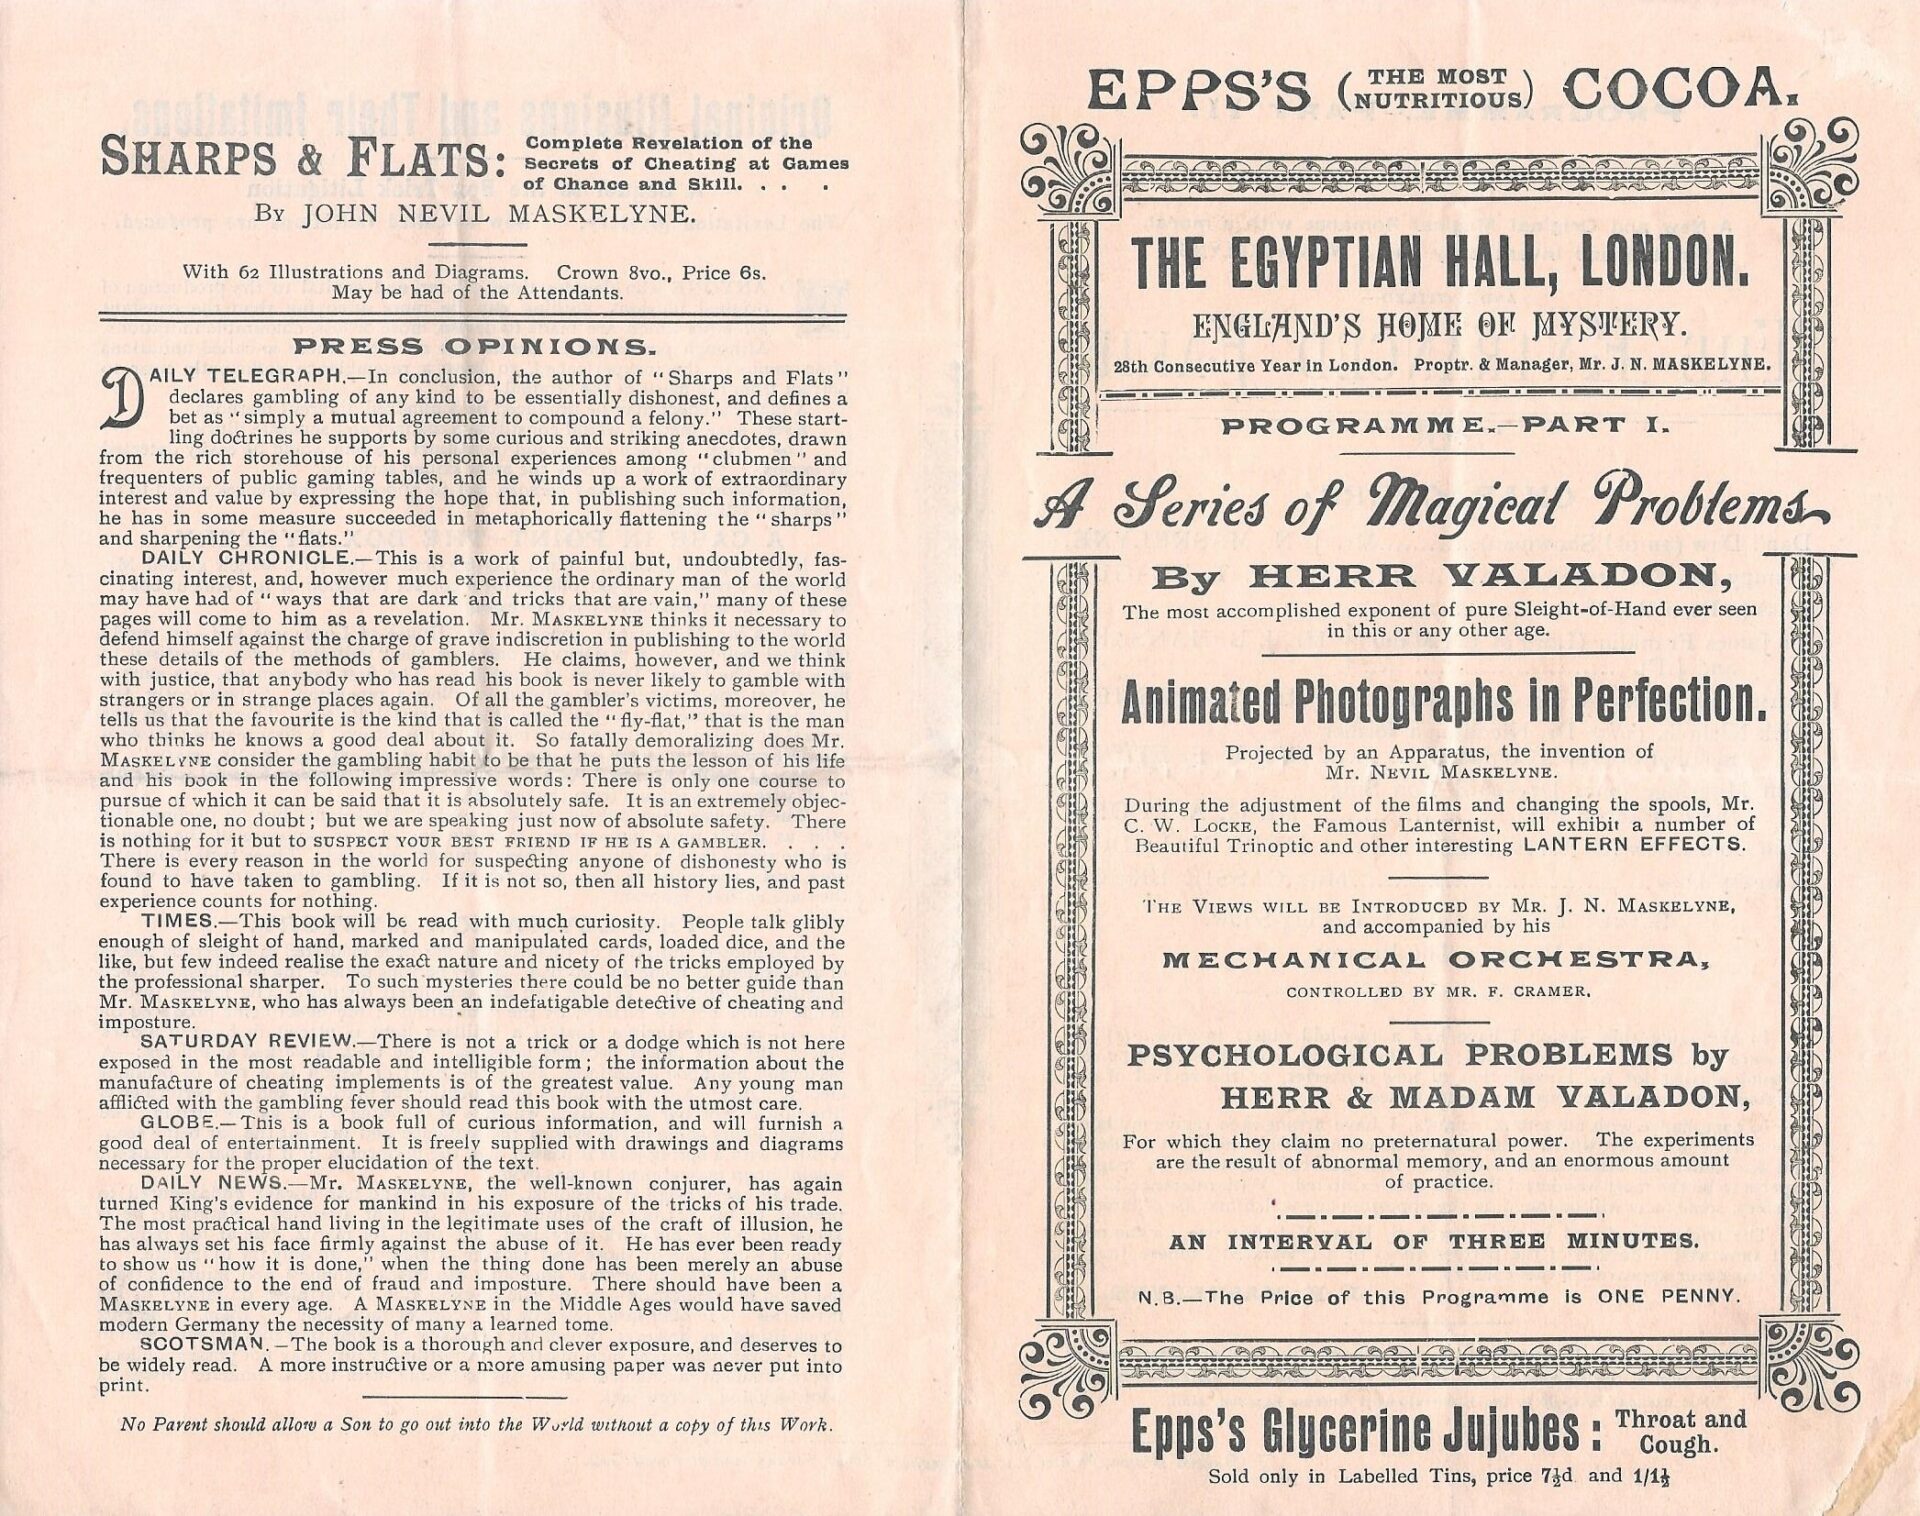 Programme for Maskelyne’s show at the Egyptian Hall, 28th consecutive year